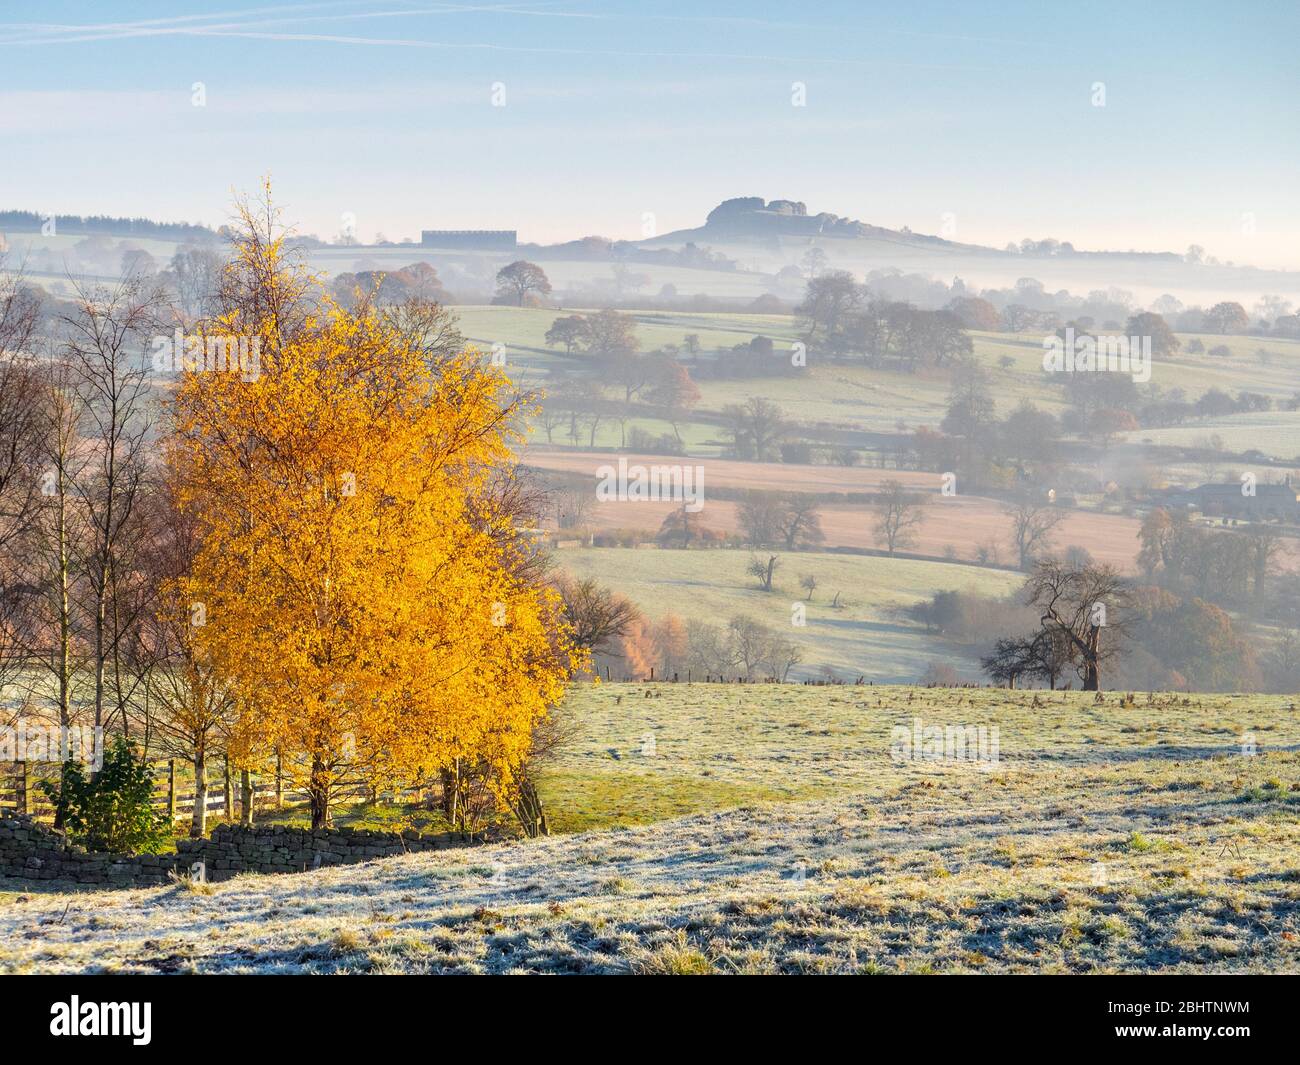 A hazy morning in late autumn highlights the golden leaves of a single golden birch tree standing prominiently in front of the rolling countryside. Stock Photo